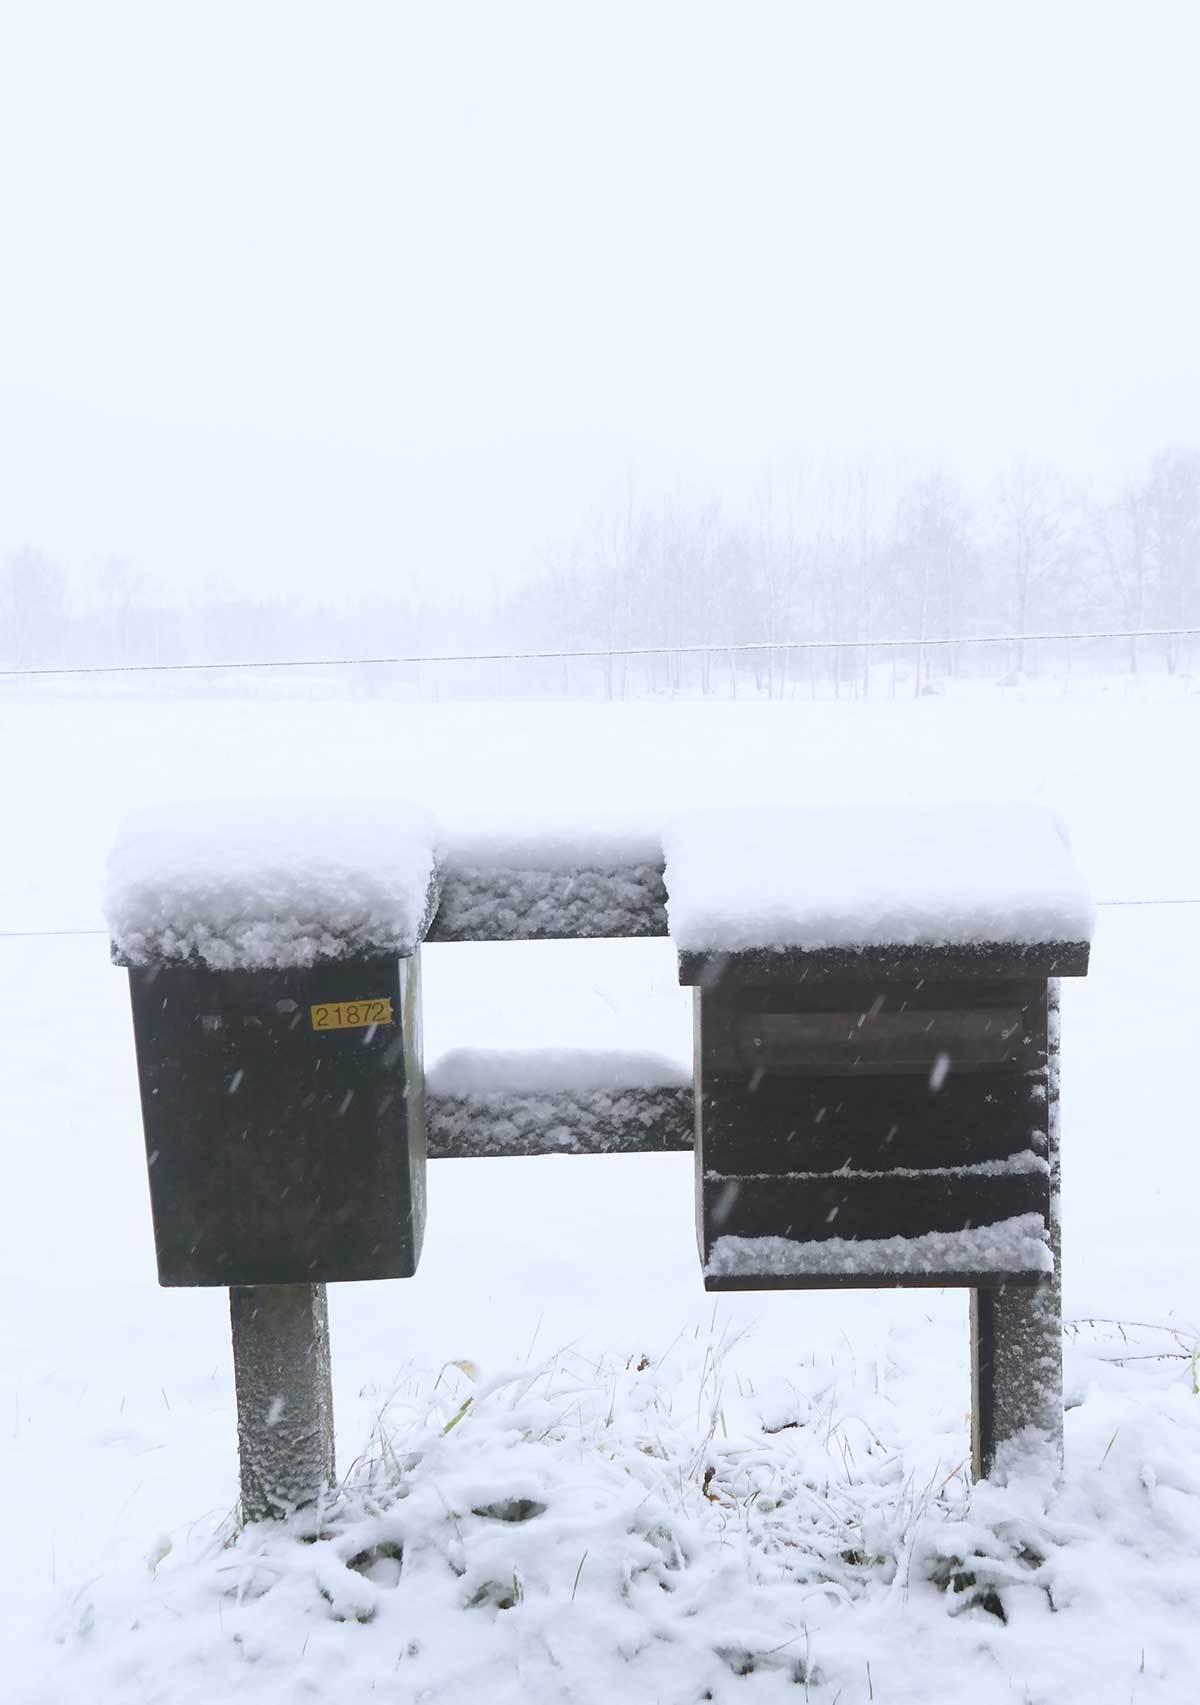 Mailbox in a snow.. It's time to get a new mailbox and move again!